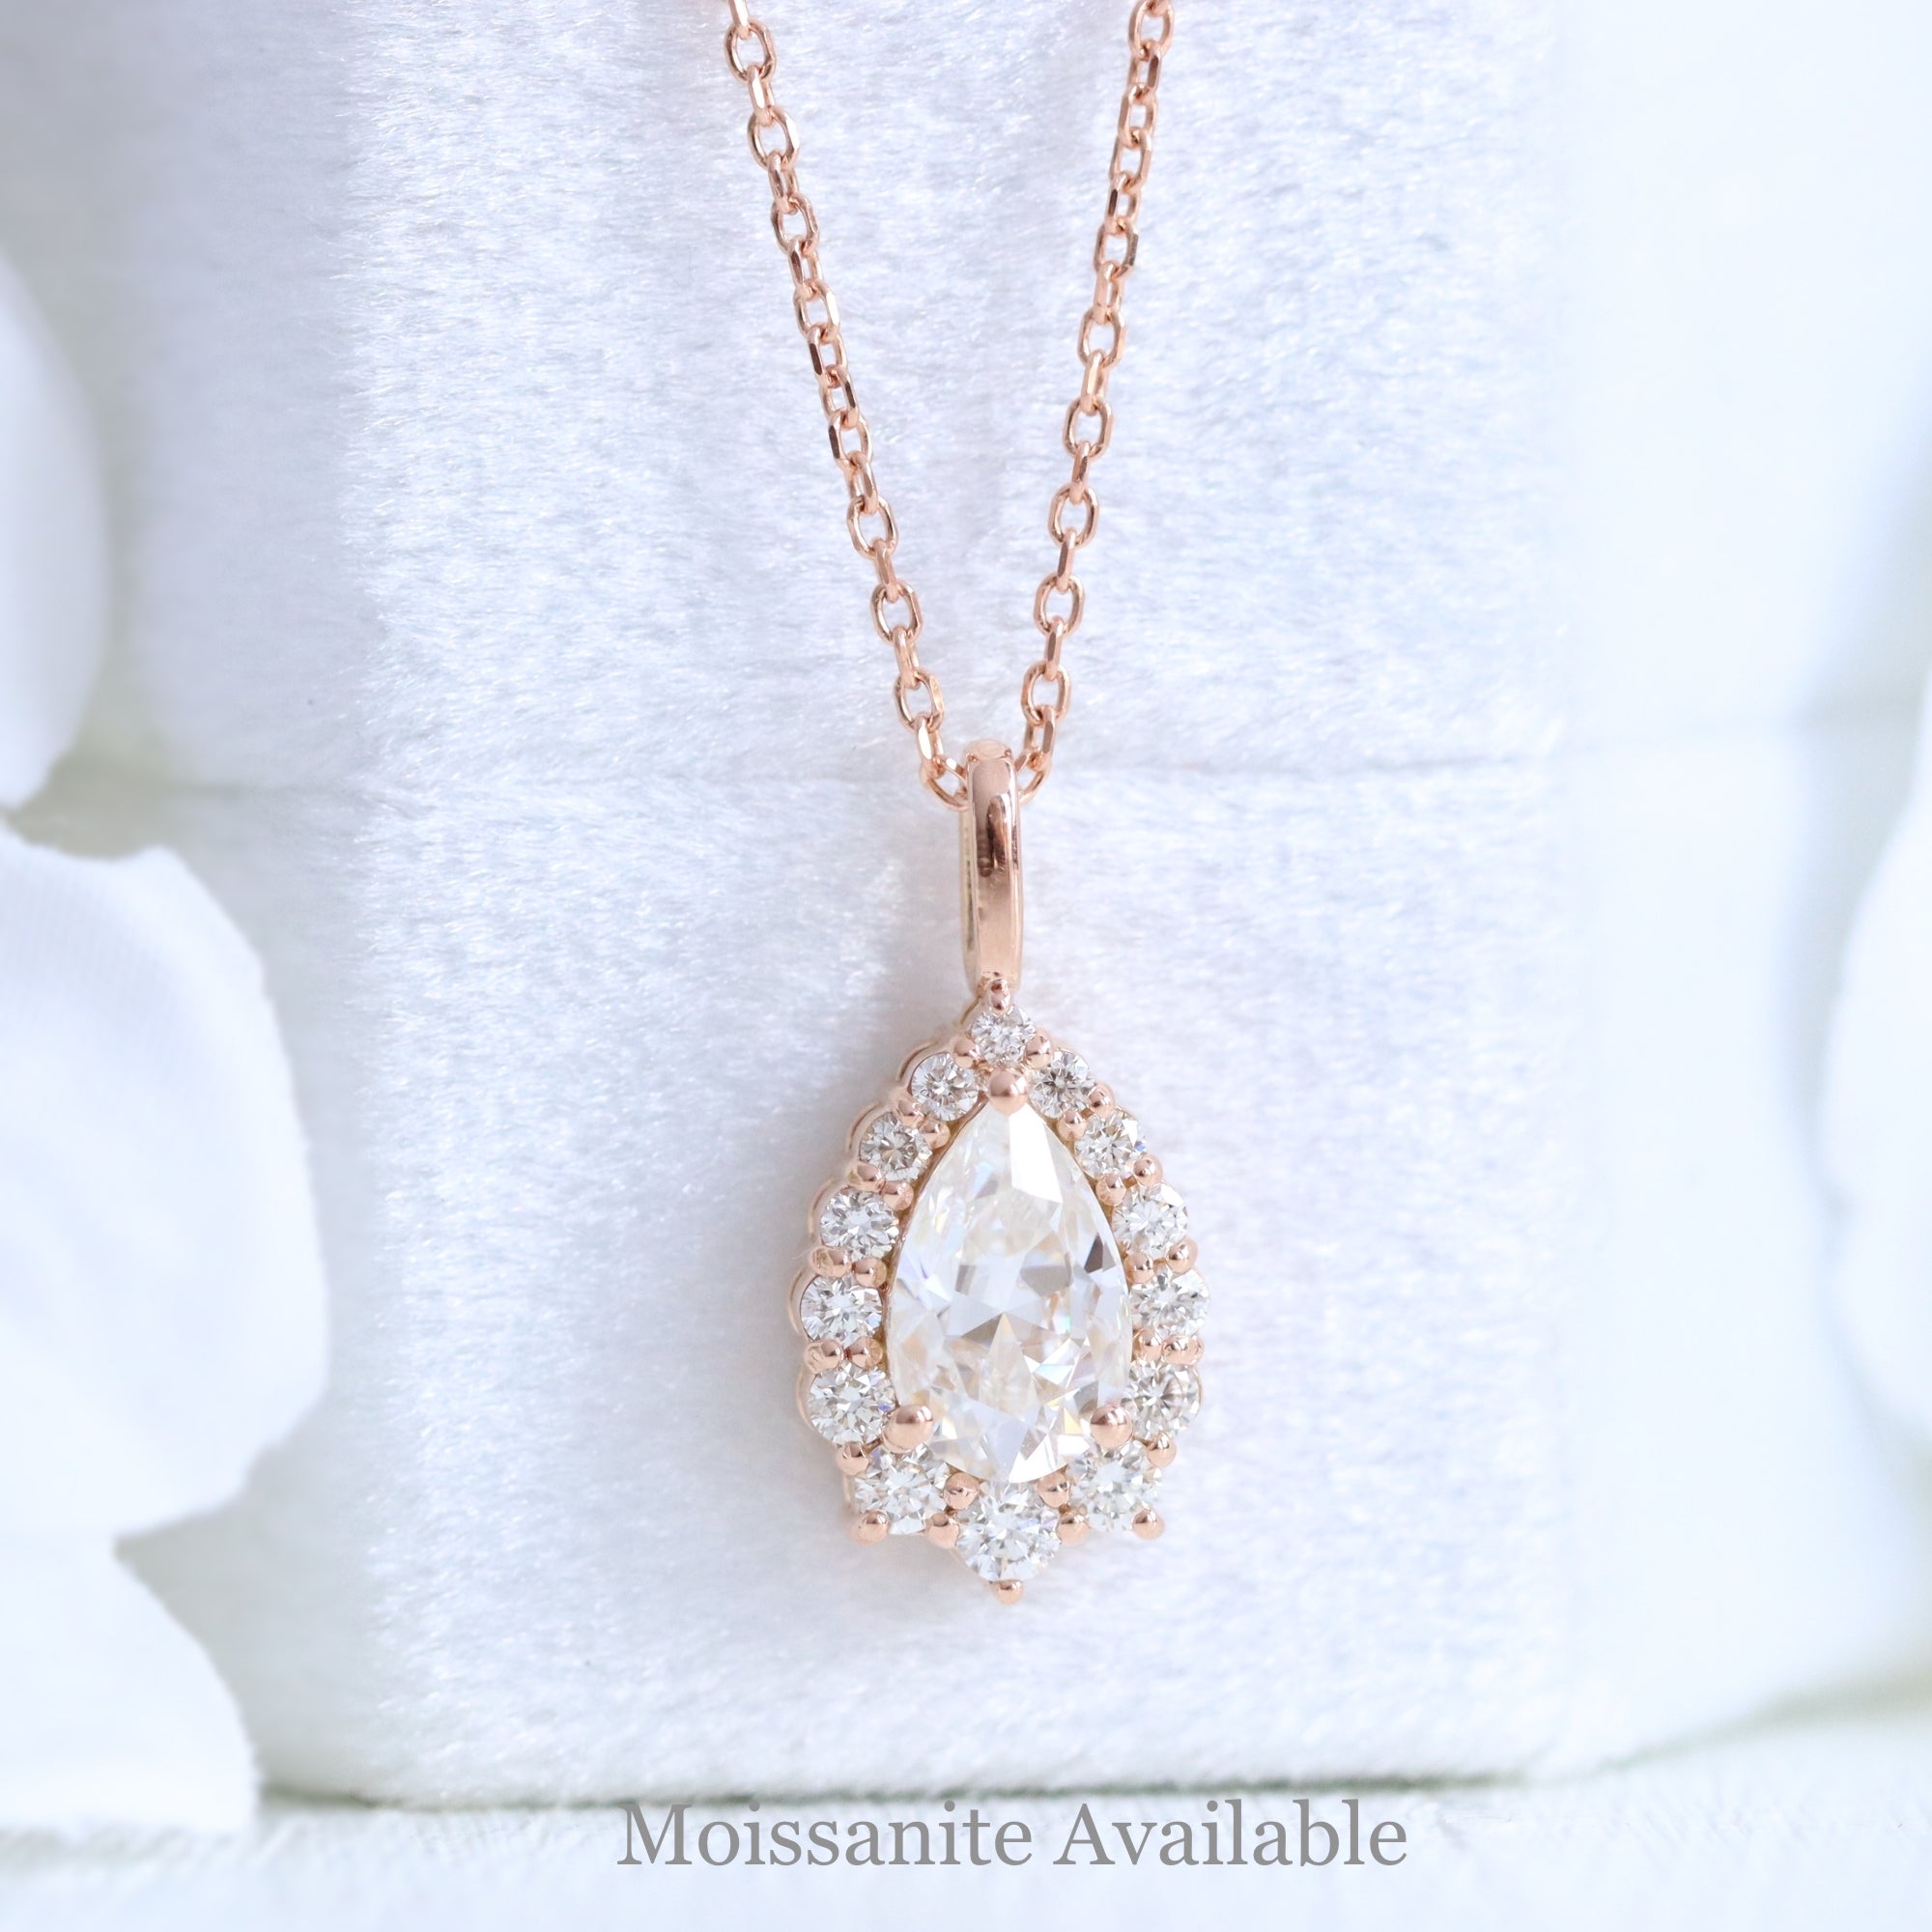 Oval Black Diamond Necklace Rose Gold Halo Diamond Pendant Chain 14K White Gold - Made to Order